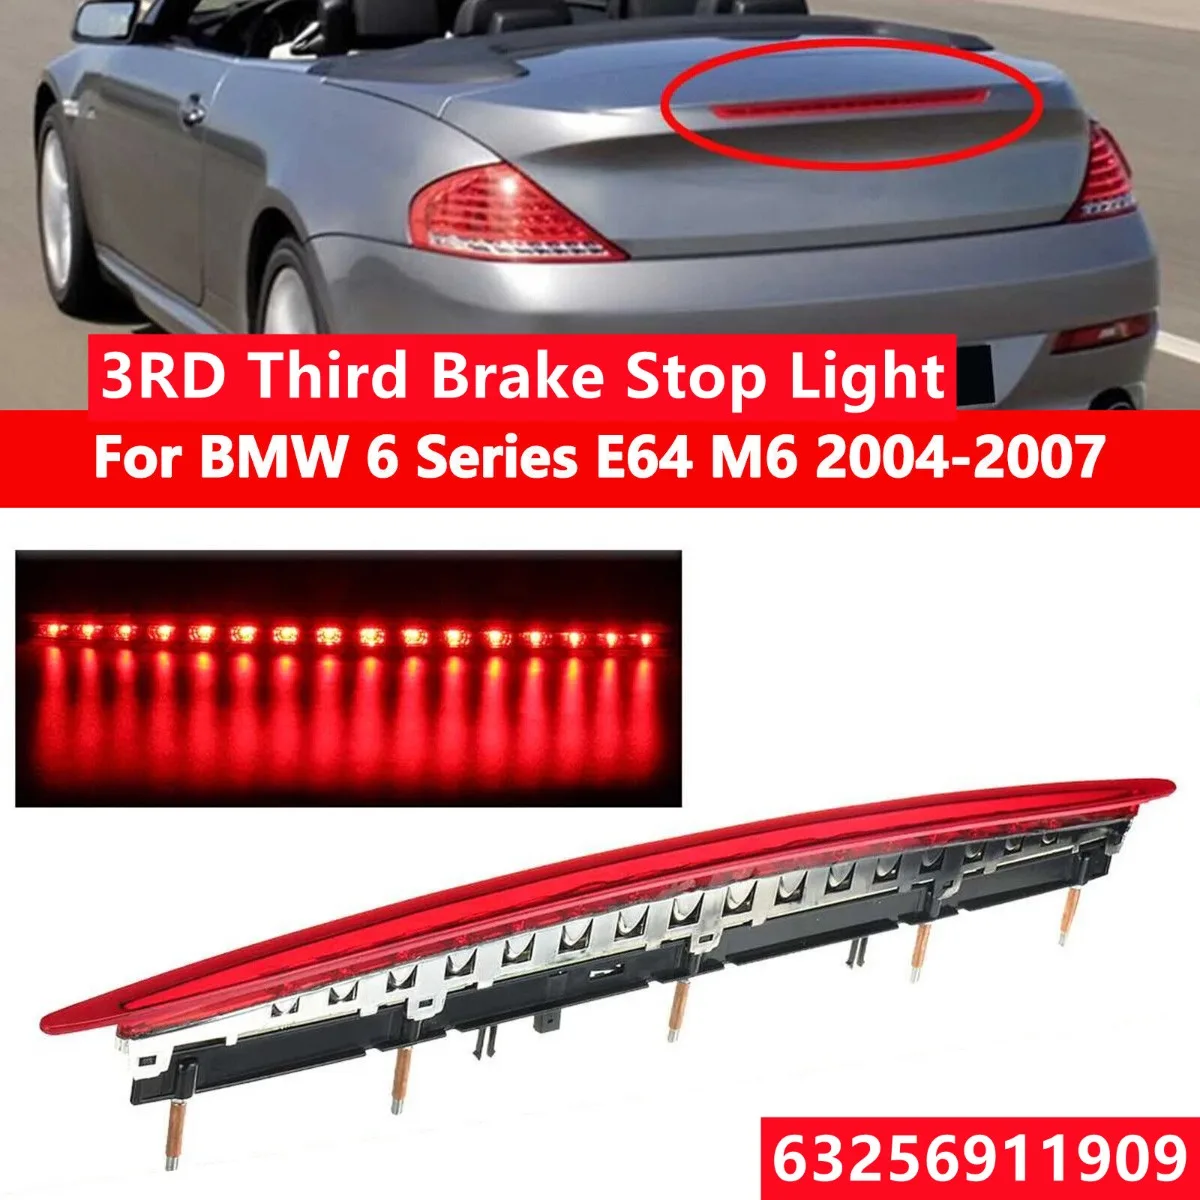 

Red LED Trunk Third Brake Lamp Assembly 63256911909 For BMW 6 Series E63 E64 645CI 650I M6 2004-2007 3rd Tail Stop Light